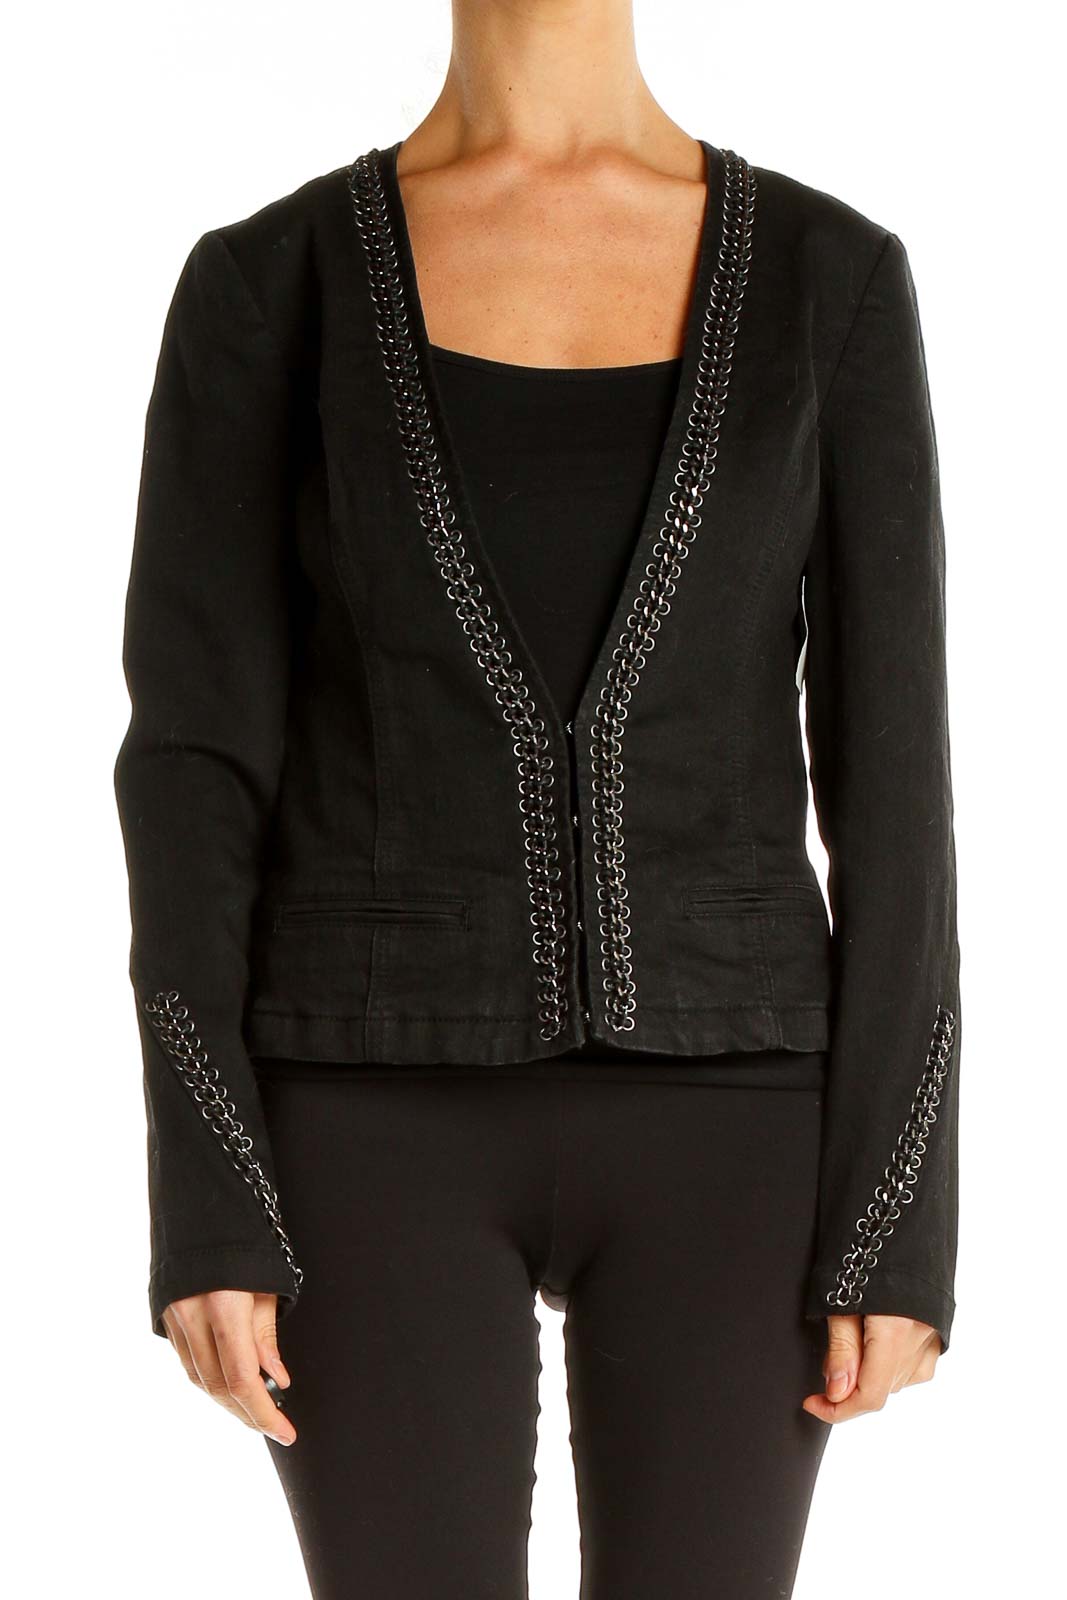 Black Jacket with Hook and Eye Closure Detail Front